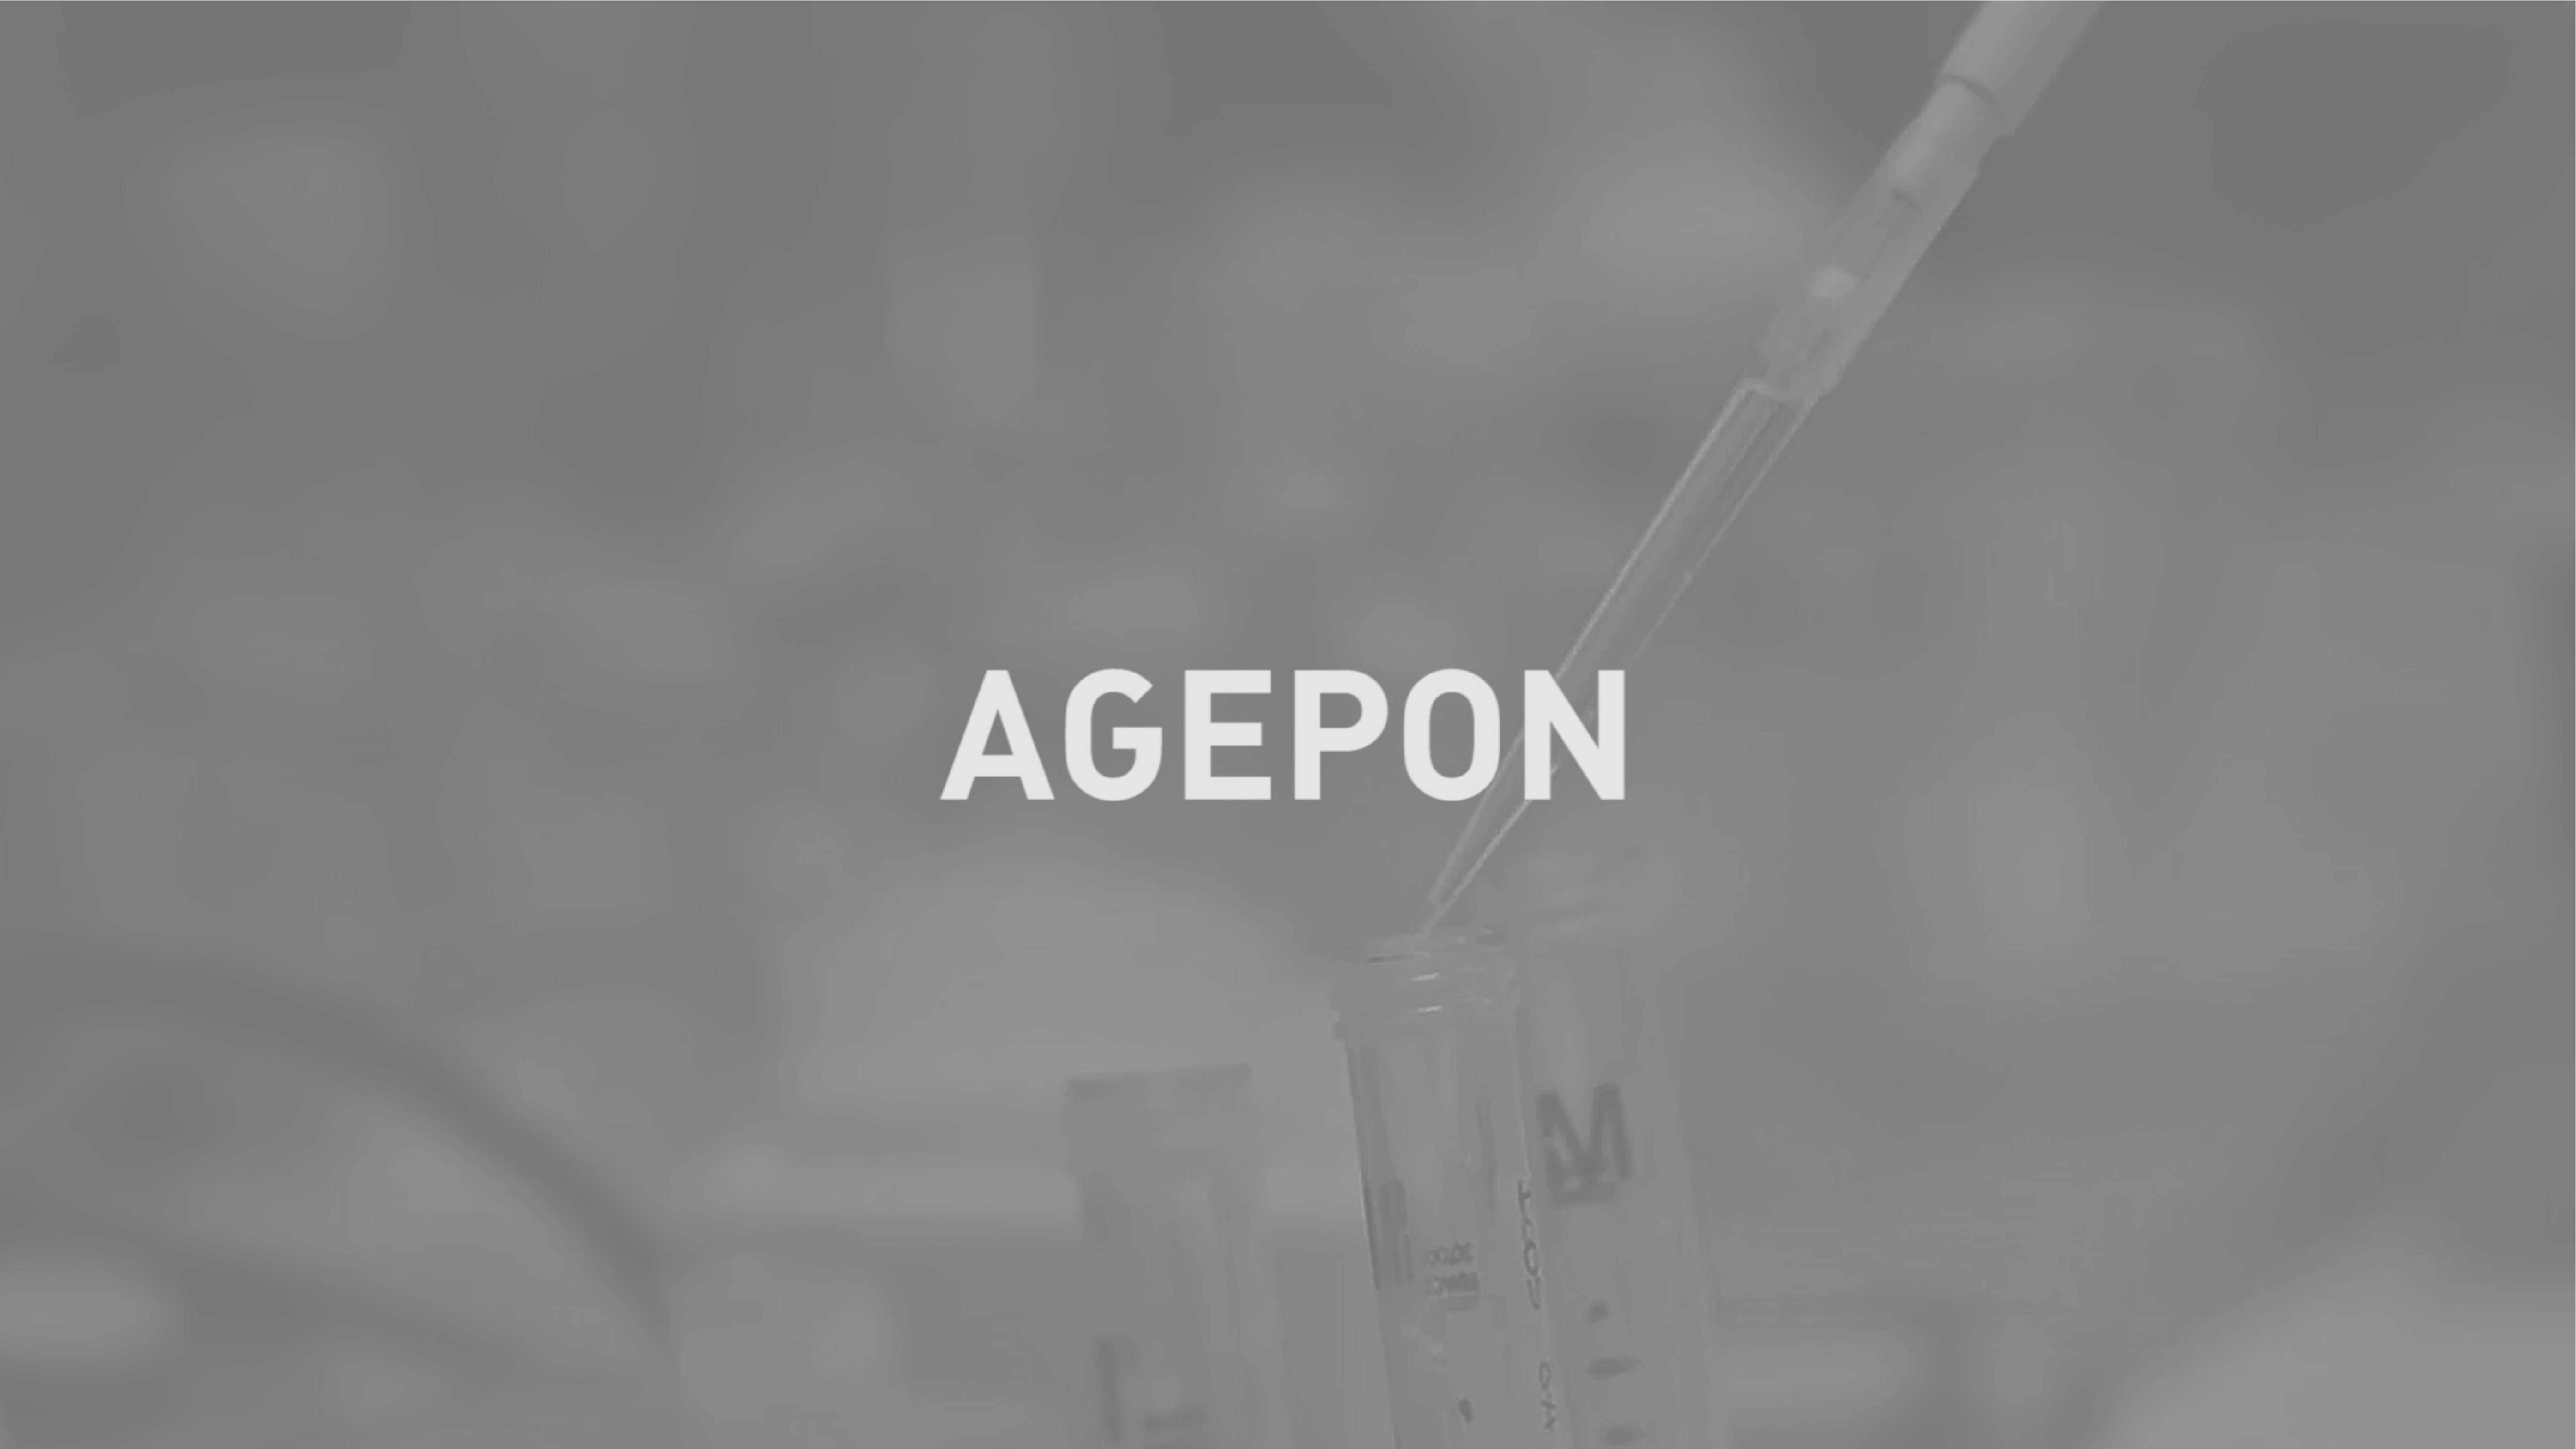 AGEPON